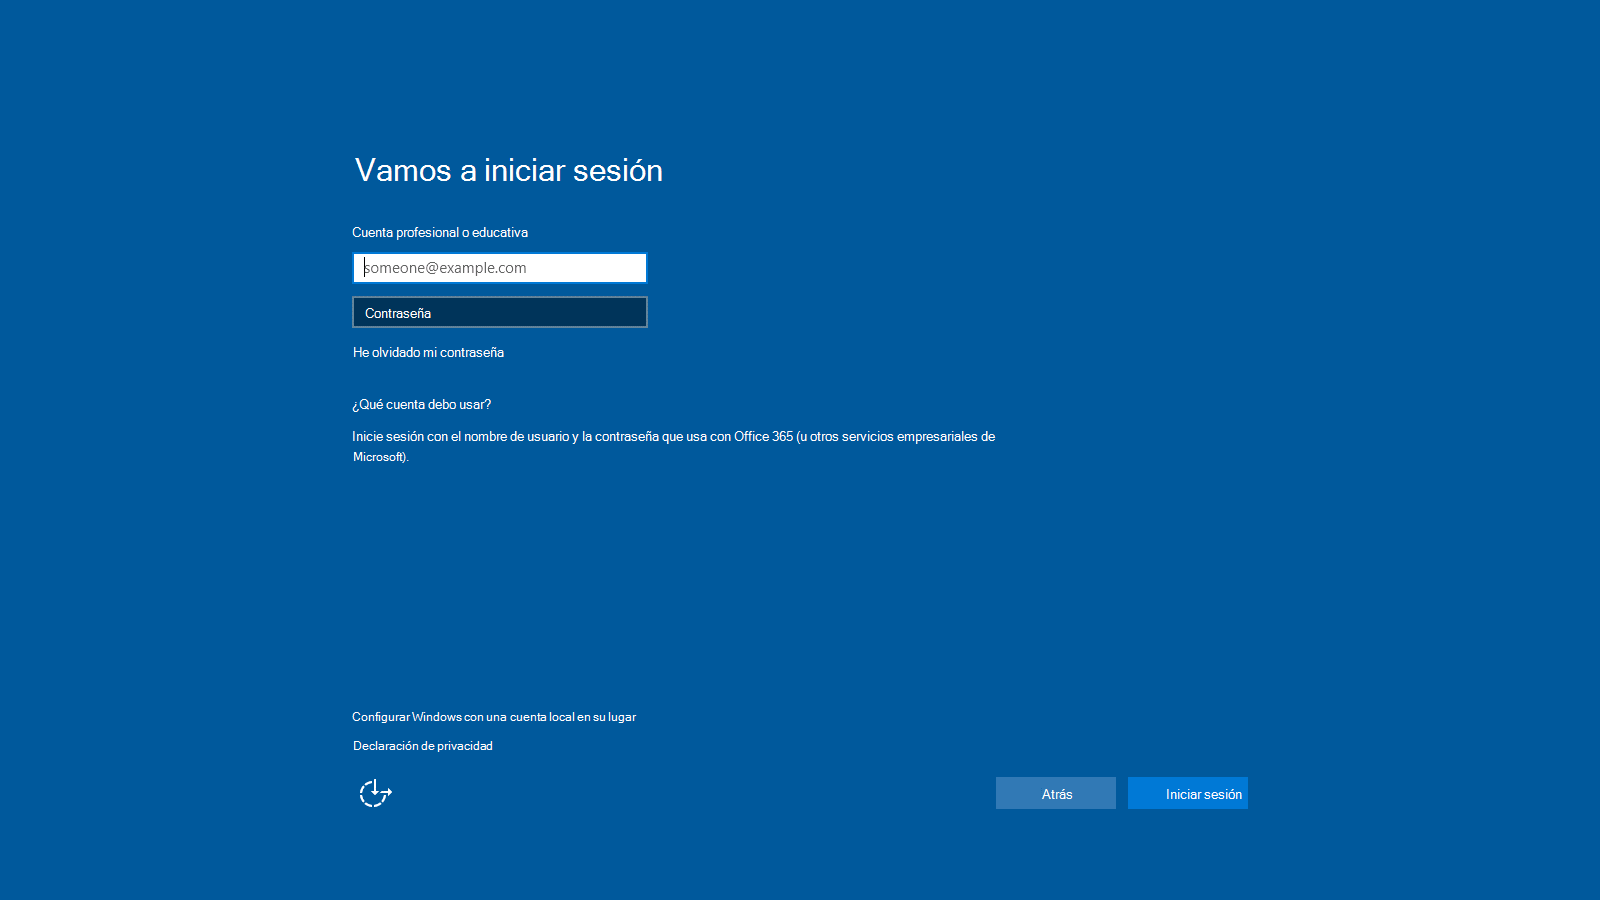 Let's get you signed in - page in Windows 10 setup